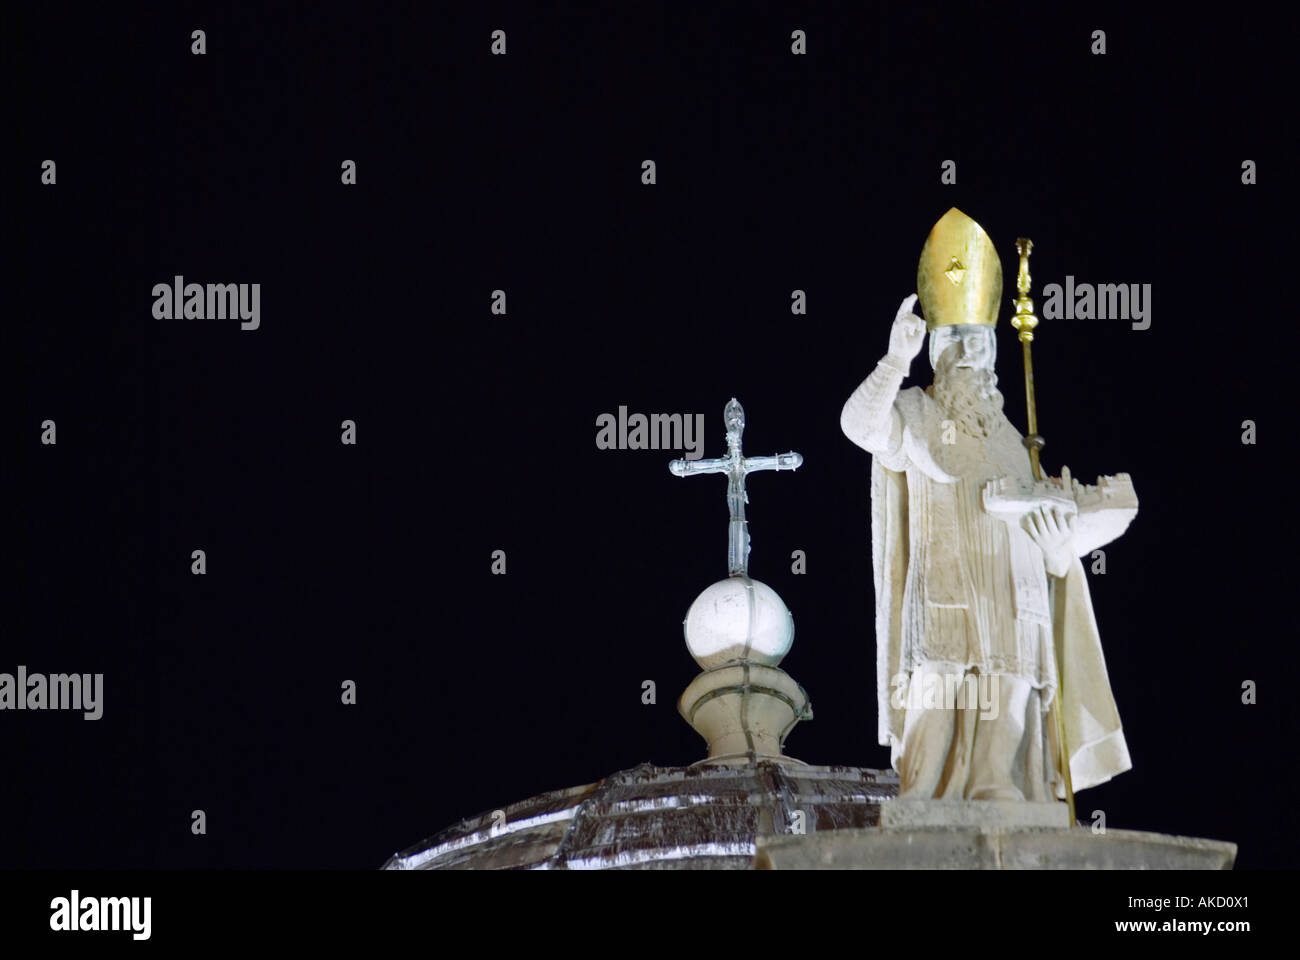 South-East Europe, Croatia, Dubrovnik, religious statue on roof of St Blaise church at night Stock Photo